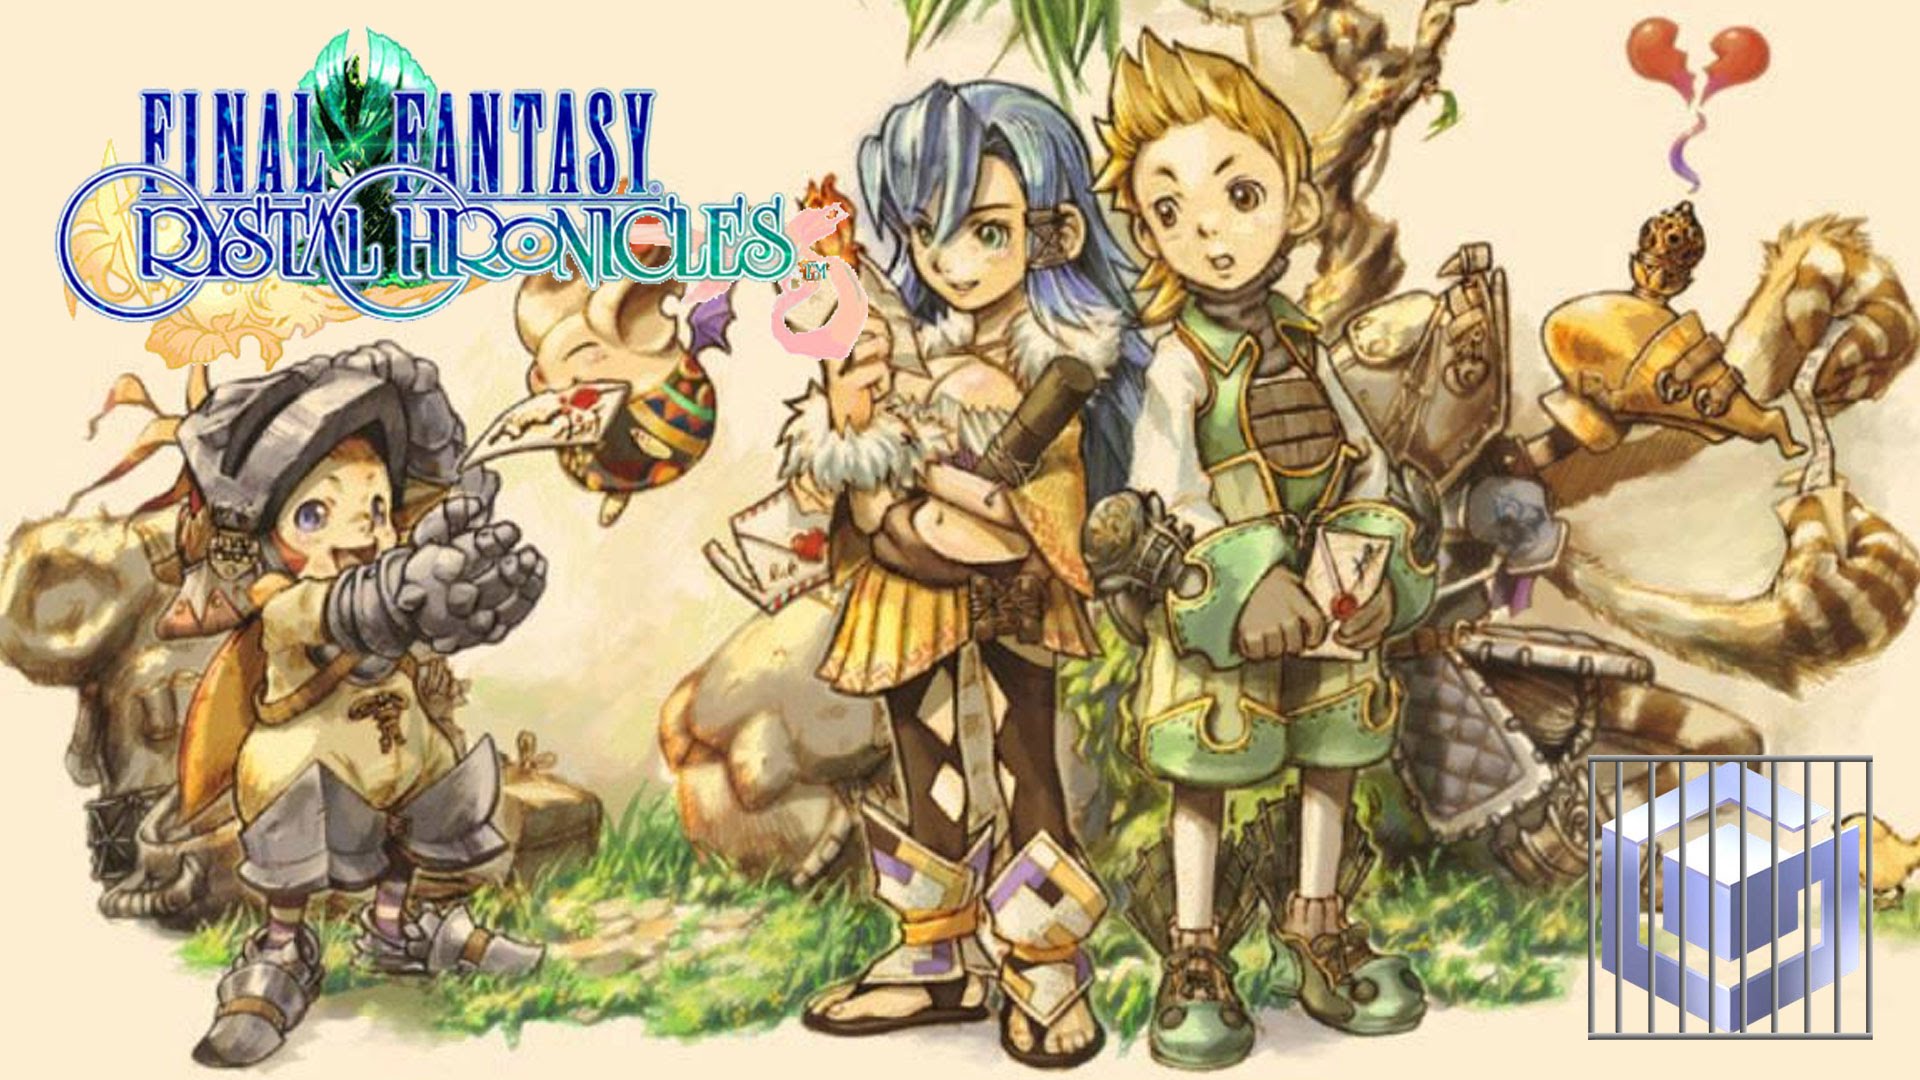 High Resolution Wallpaper | Final Fantasy Crystal Chronicles 1920x1080 px